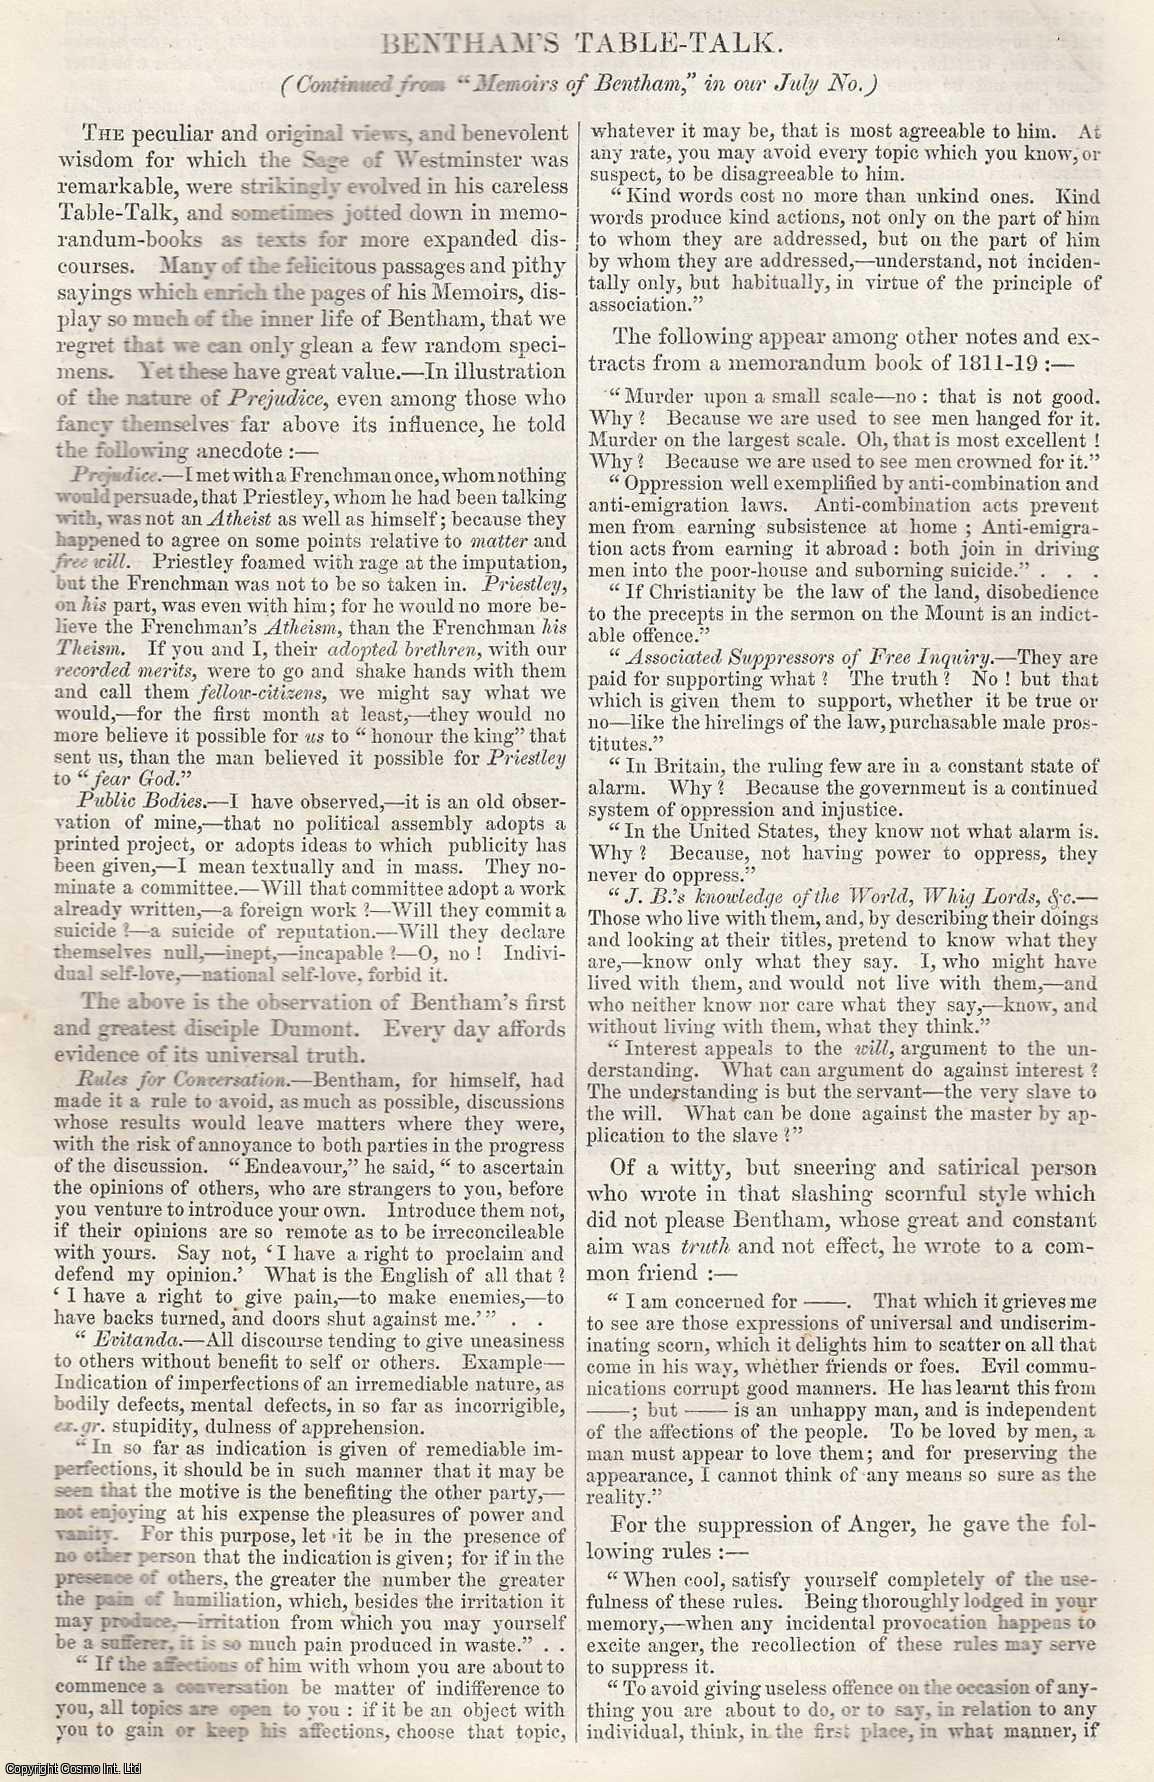 Johnstone, Christian - Bentham's Table Talk. Memoirs of Jeremy Bentham (Part 2 concluded). An original article from Tait's Edinburgh Magazine, 1842.